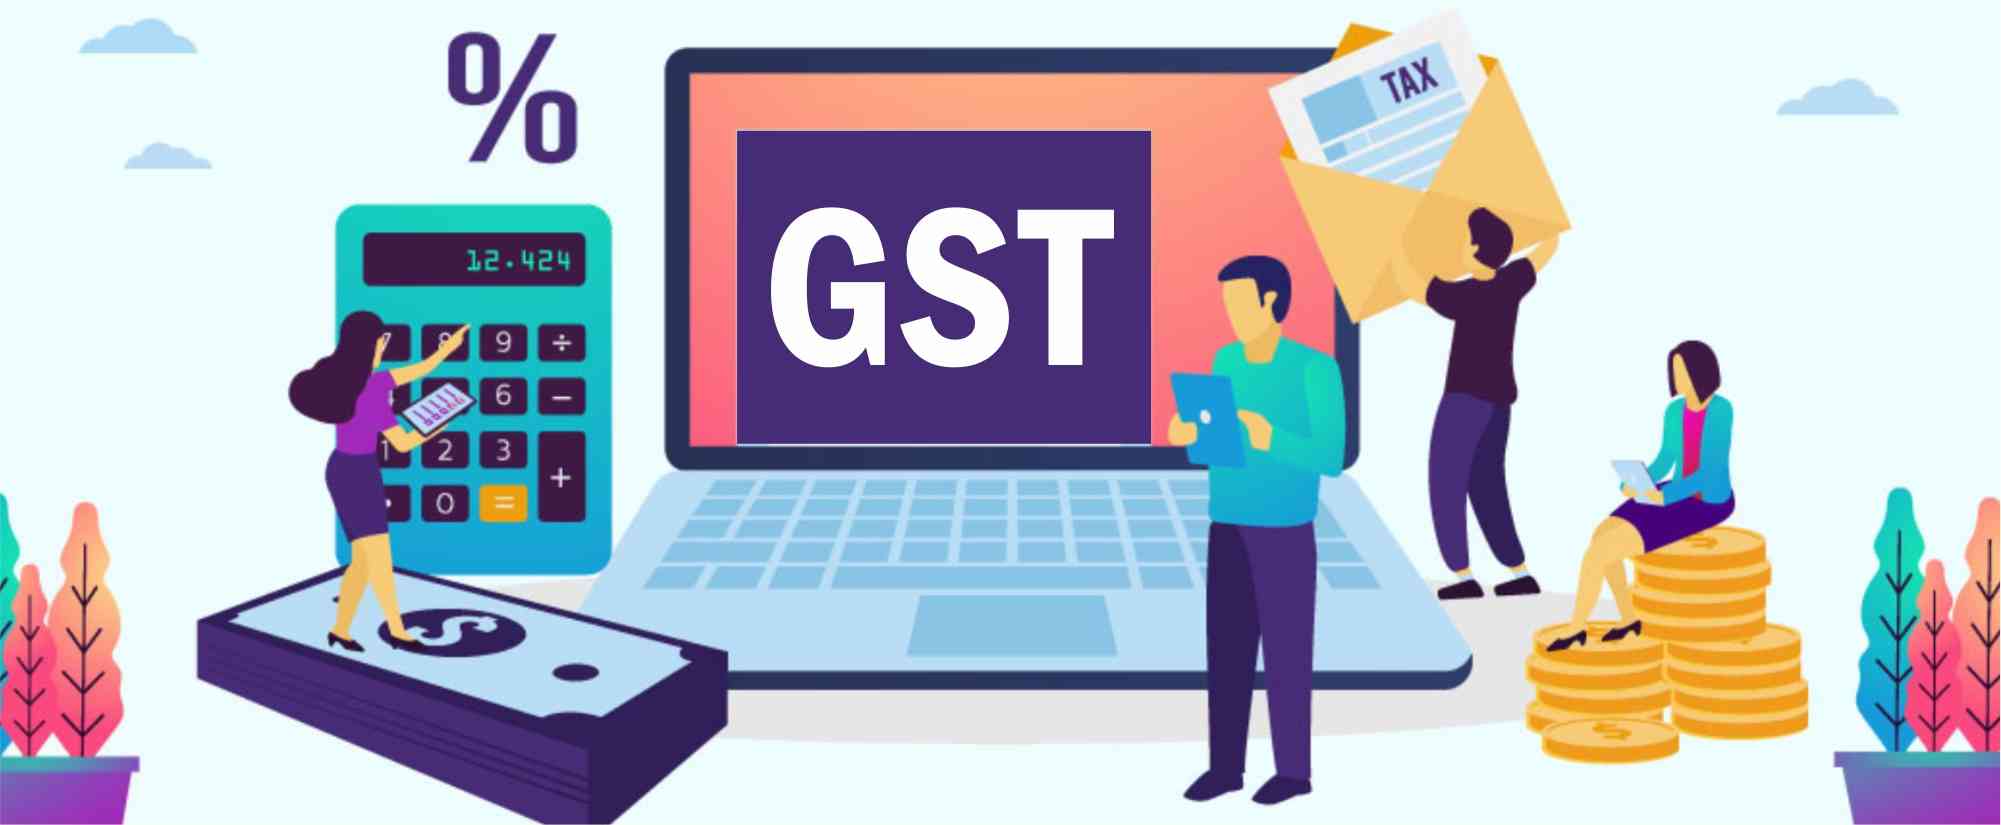 GST Date Extension